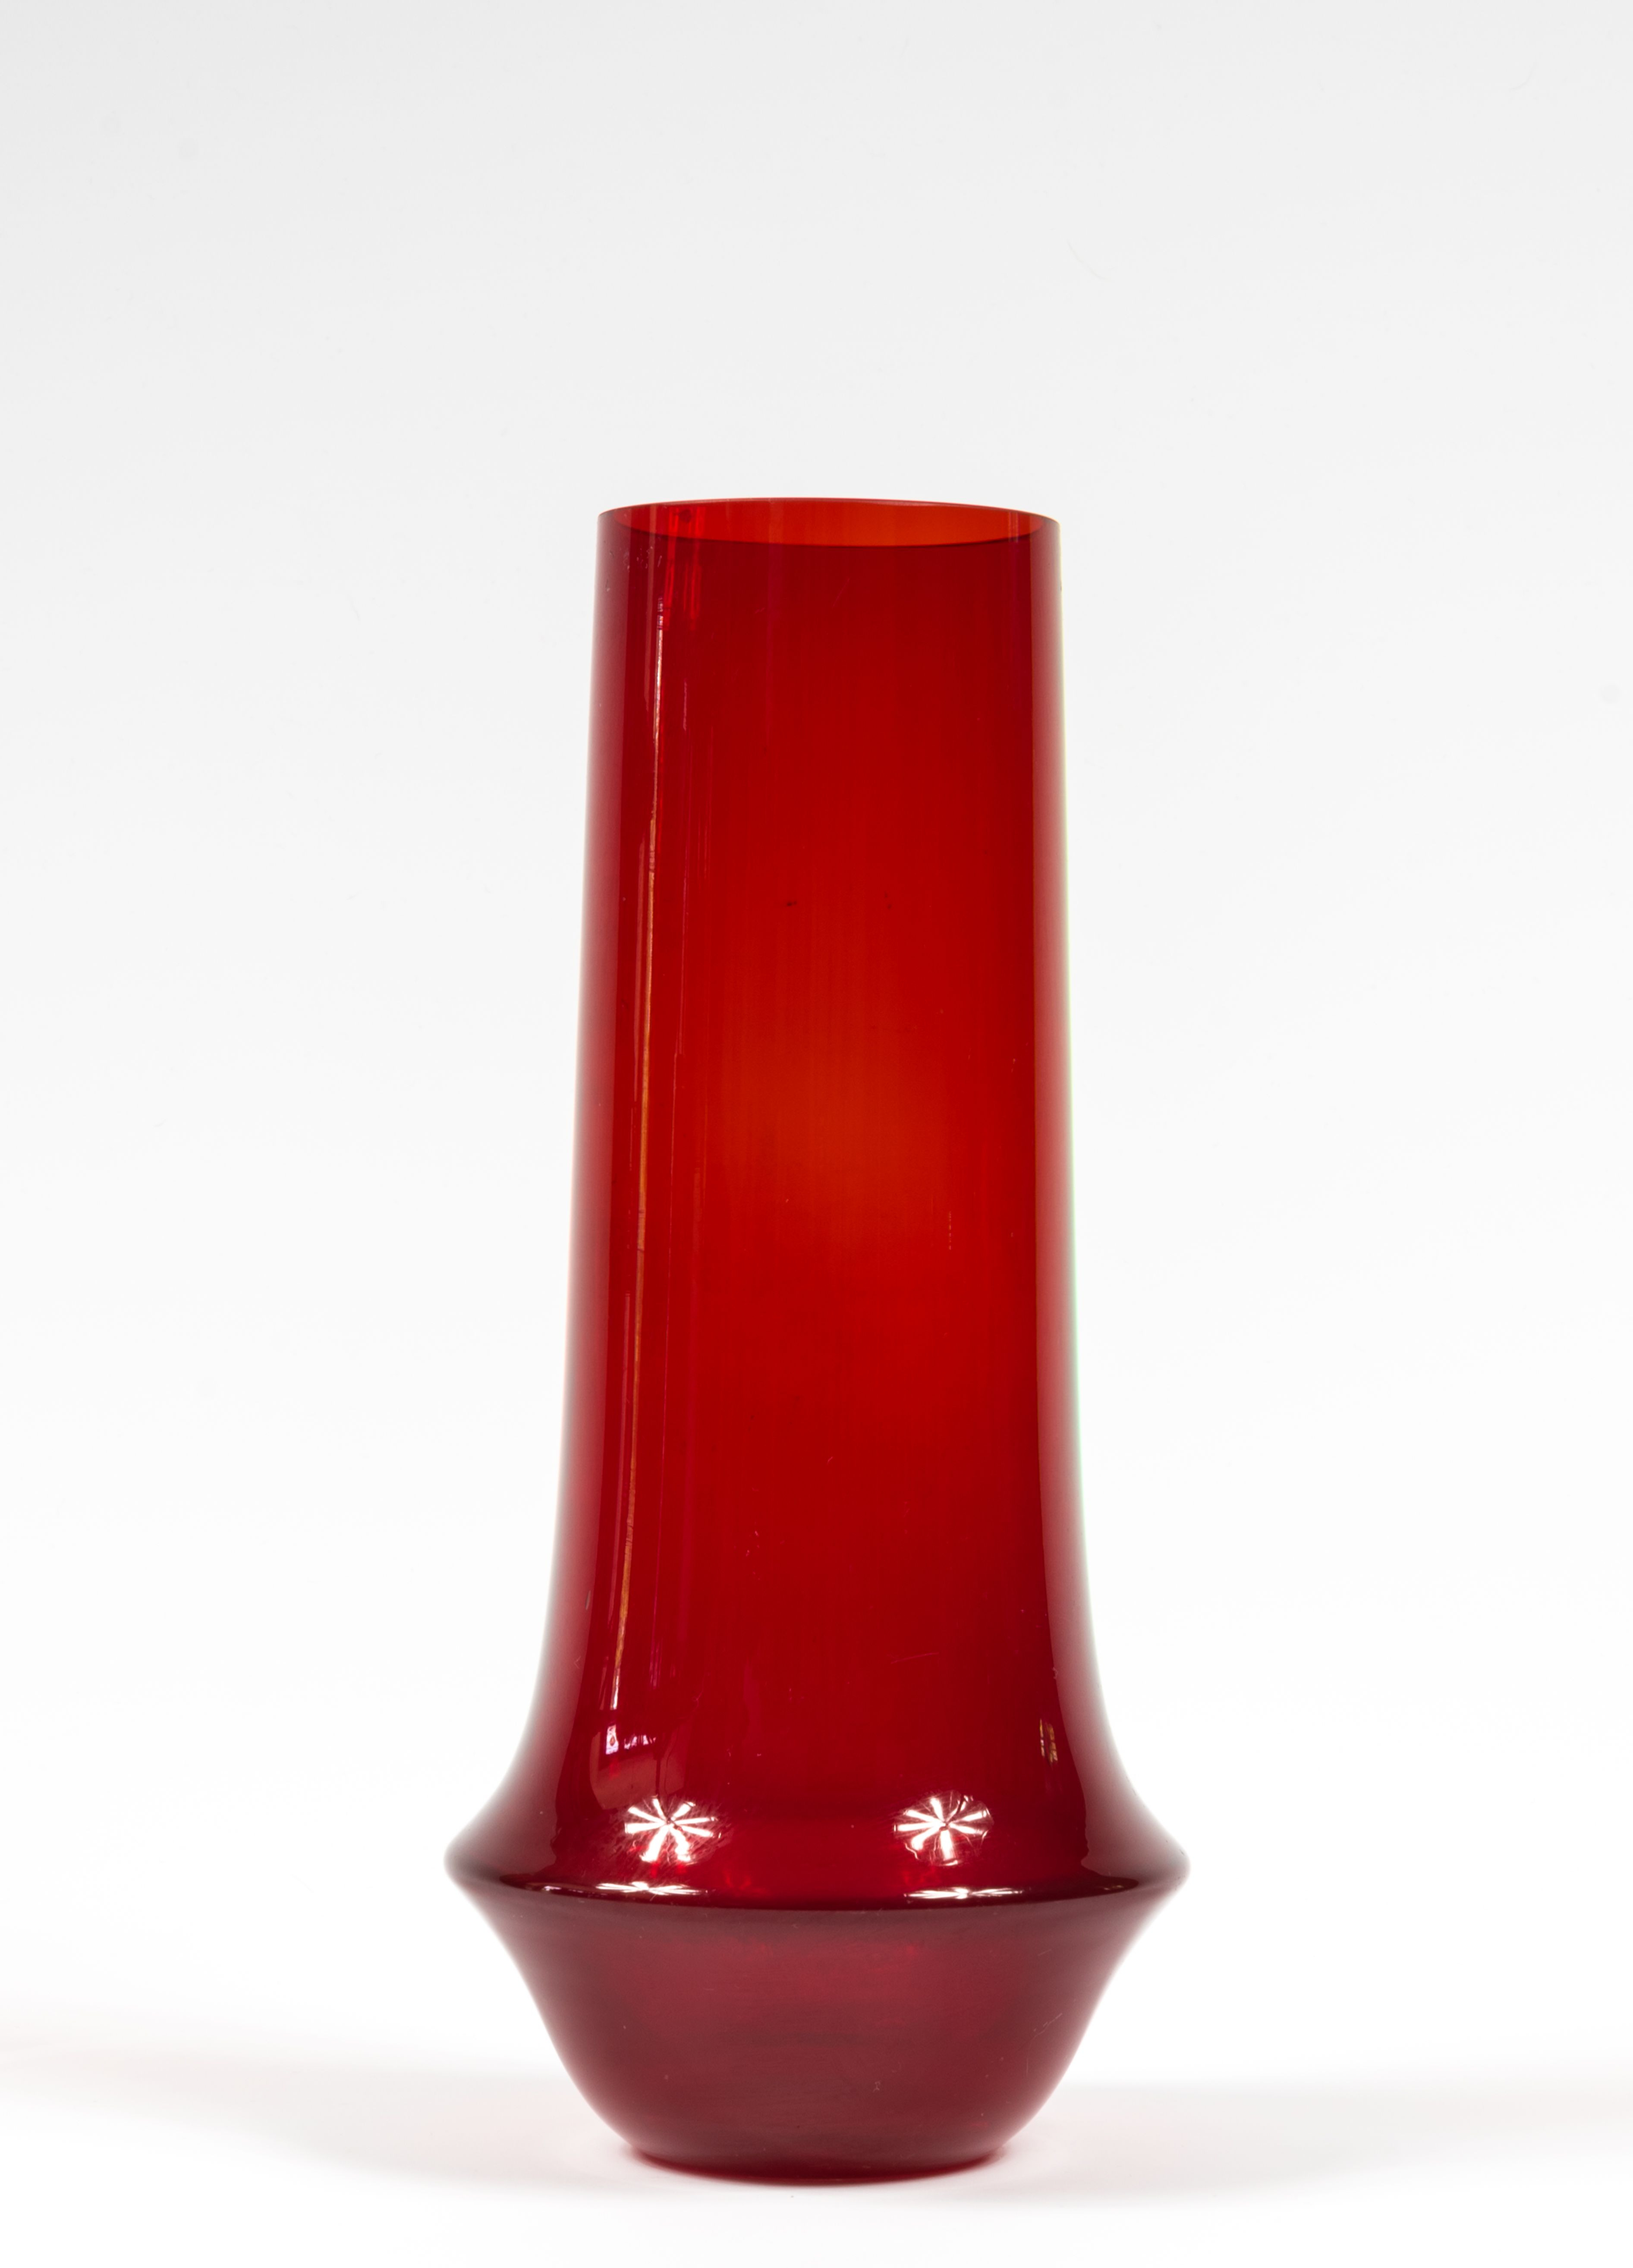 28 attractive Large Square Clear Glass Vases 2024 free download large square clear glass vases of riihimac2a4en lasi oy riihimaki red glass vase by tamara aladin throughout large scandinavian red glass vase designed by tamara aladin c1963 for riihimaki r